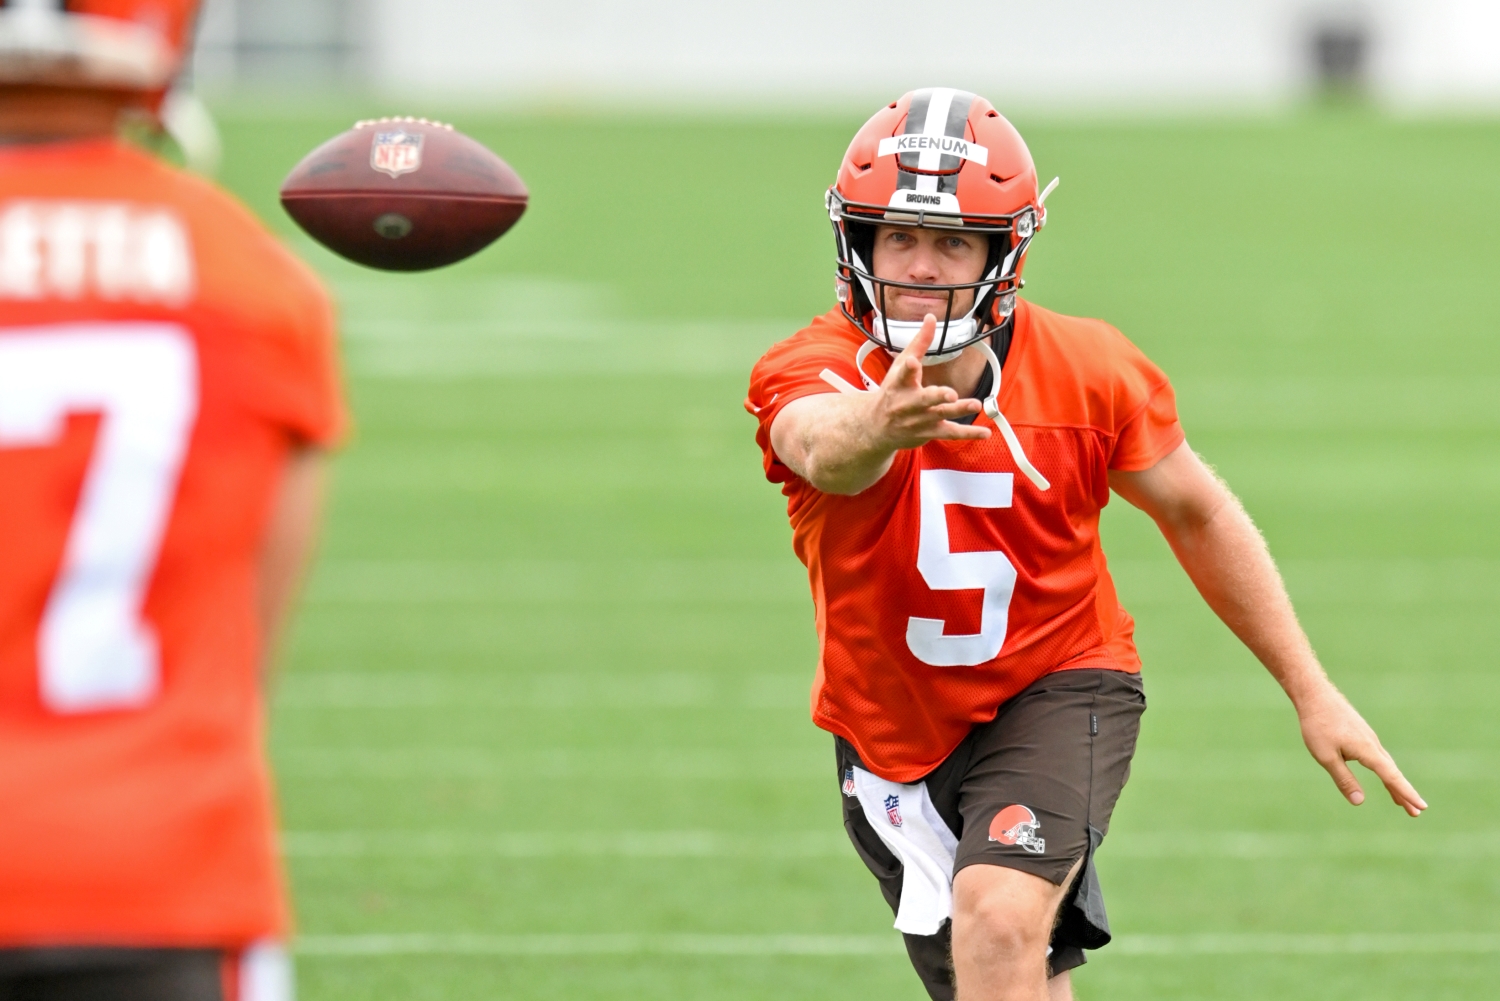 Cleveland Browns quarterback Case Keenum tosses a ball to teammate Kyle Lauletta during training camp practice.